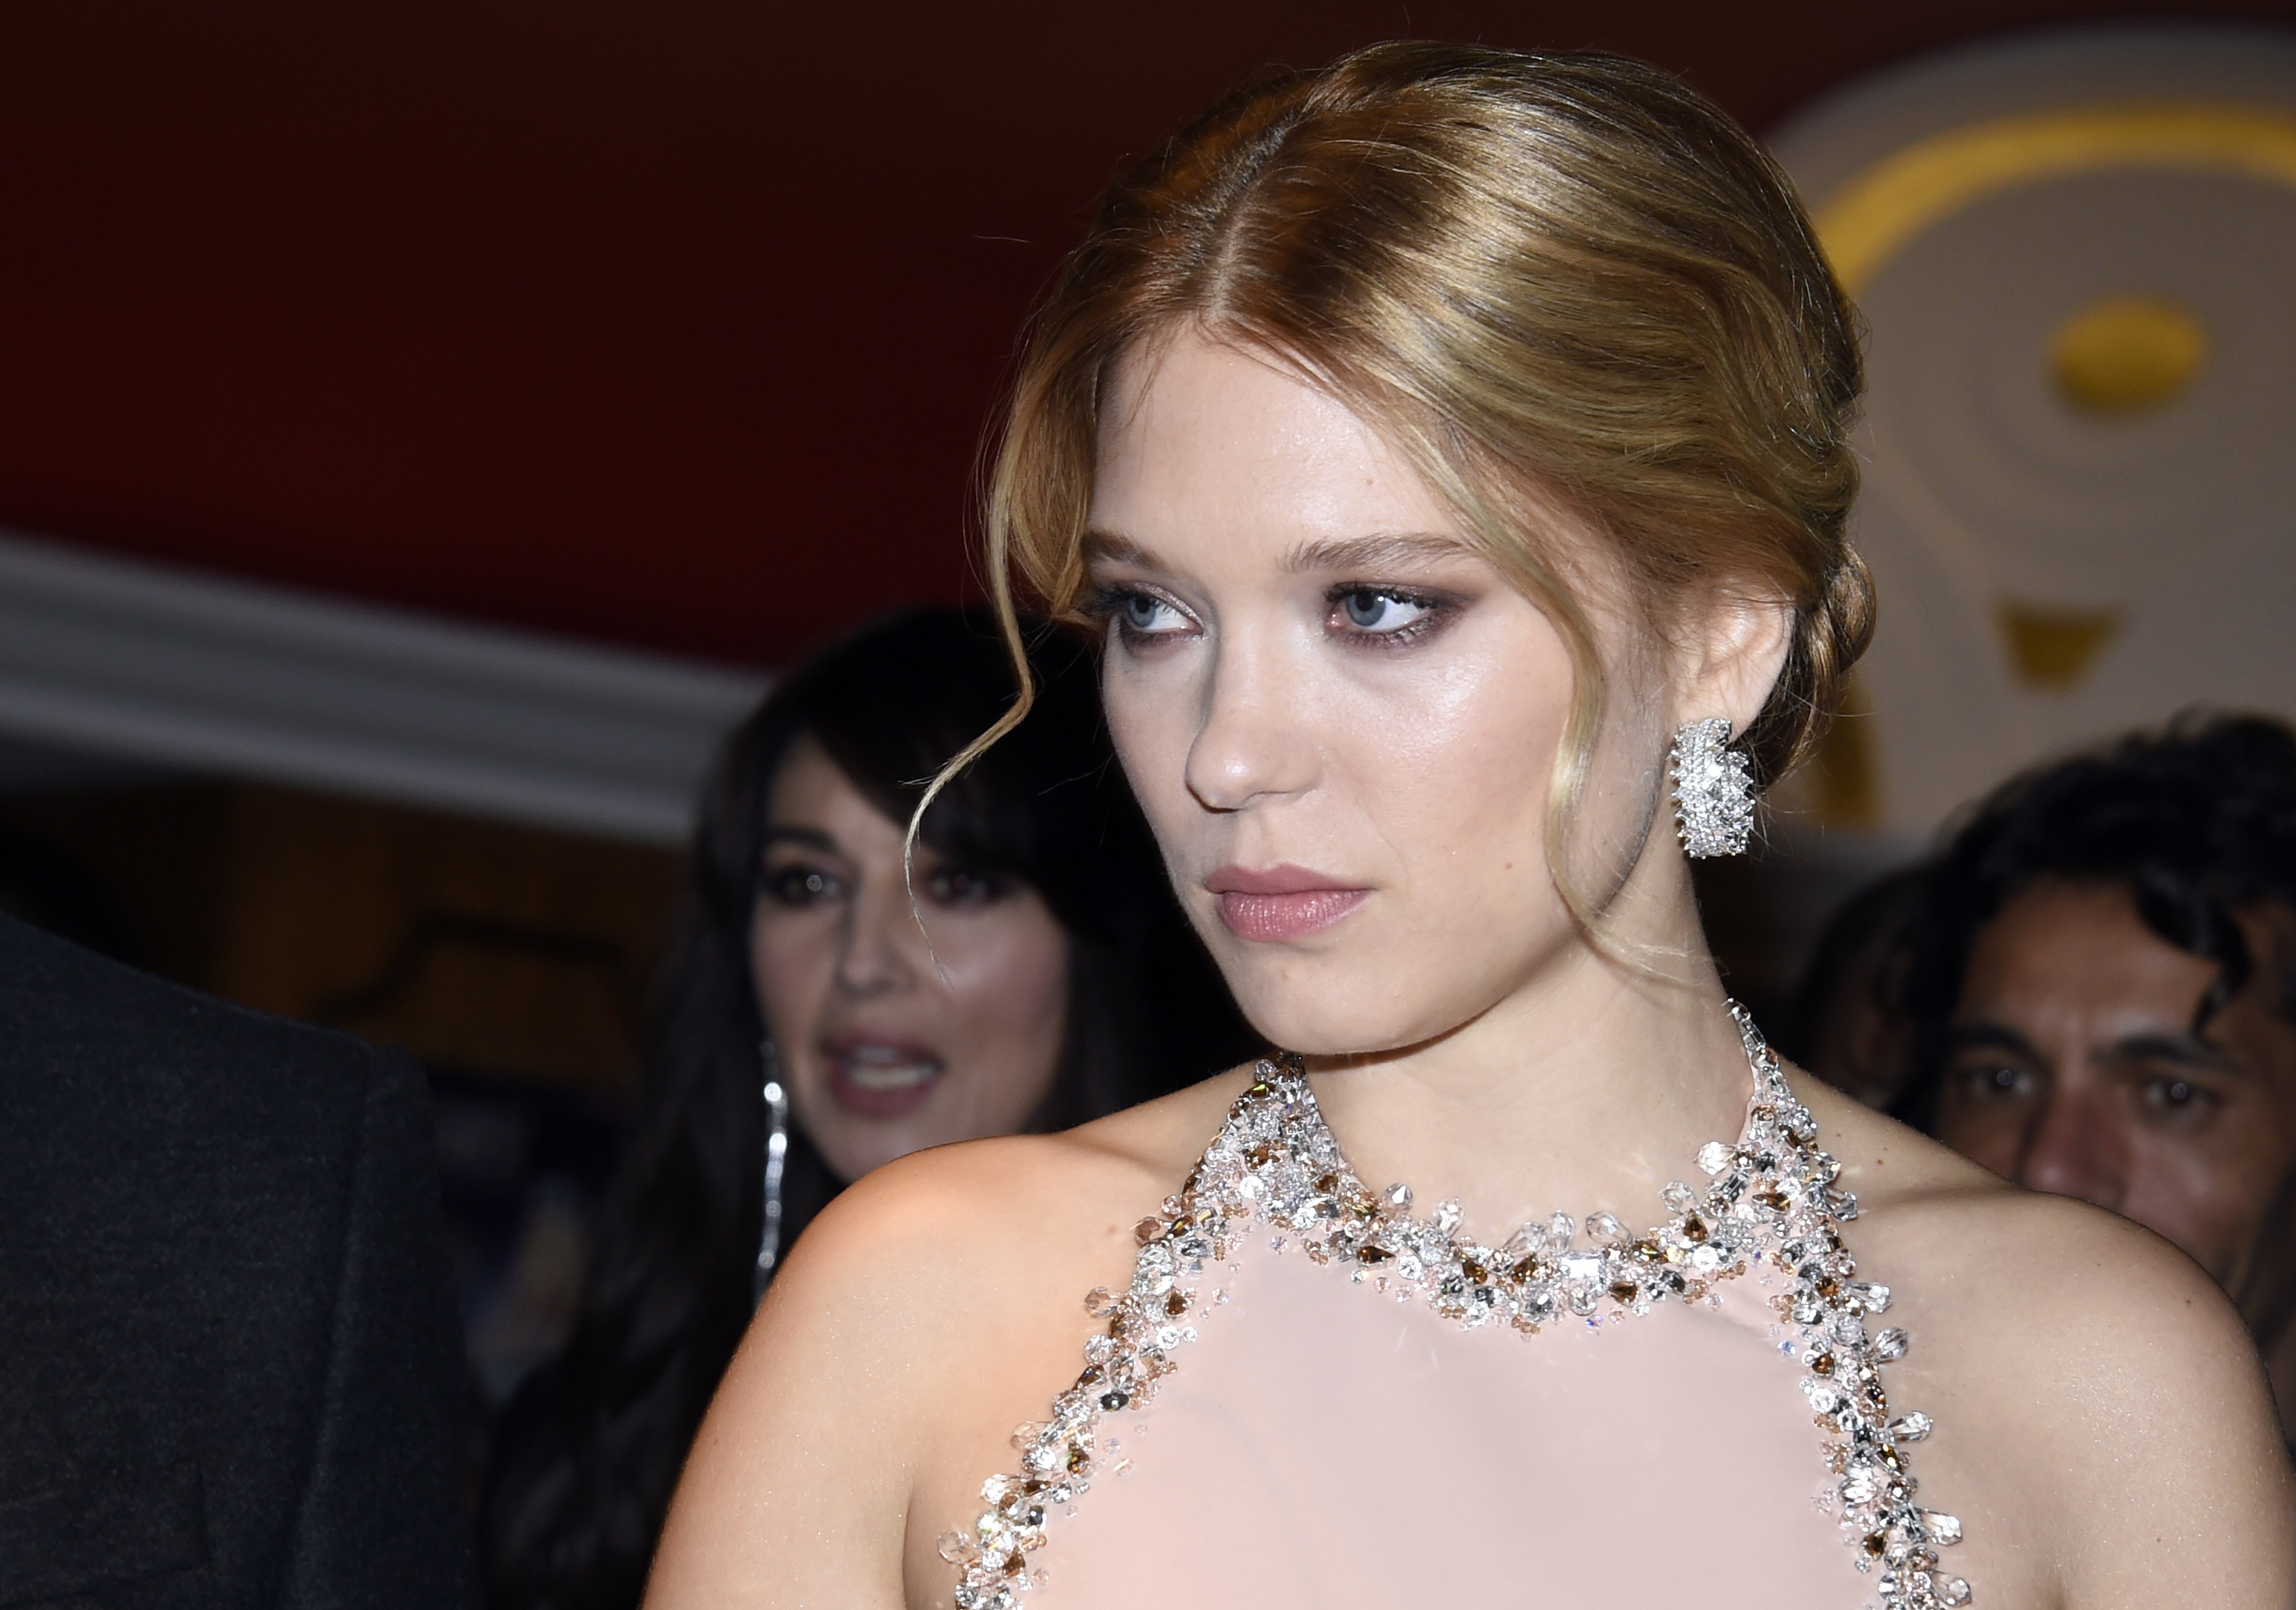 13 Times 'Spectre' Star Lea Seydoux Stunned on the Red Carpet